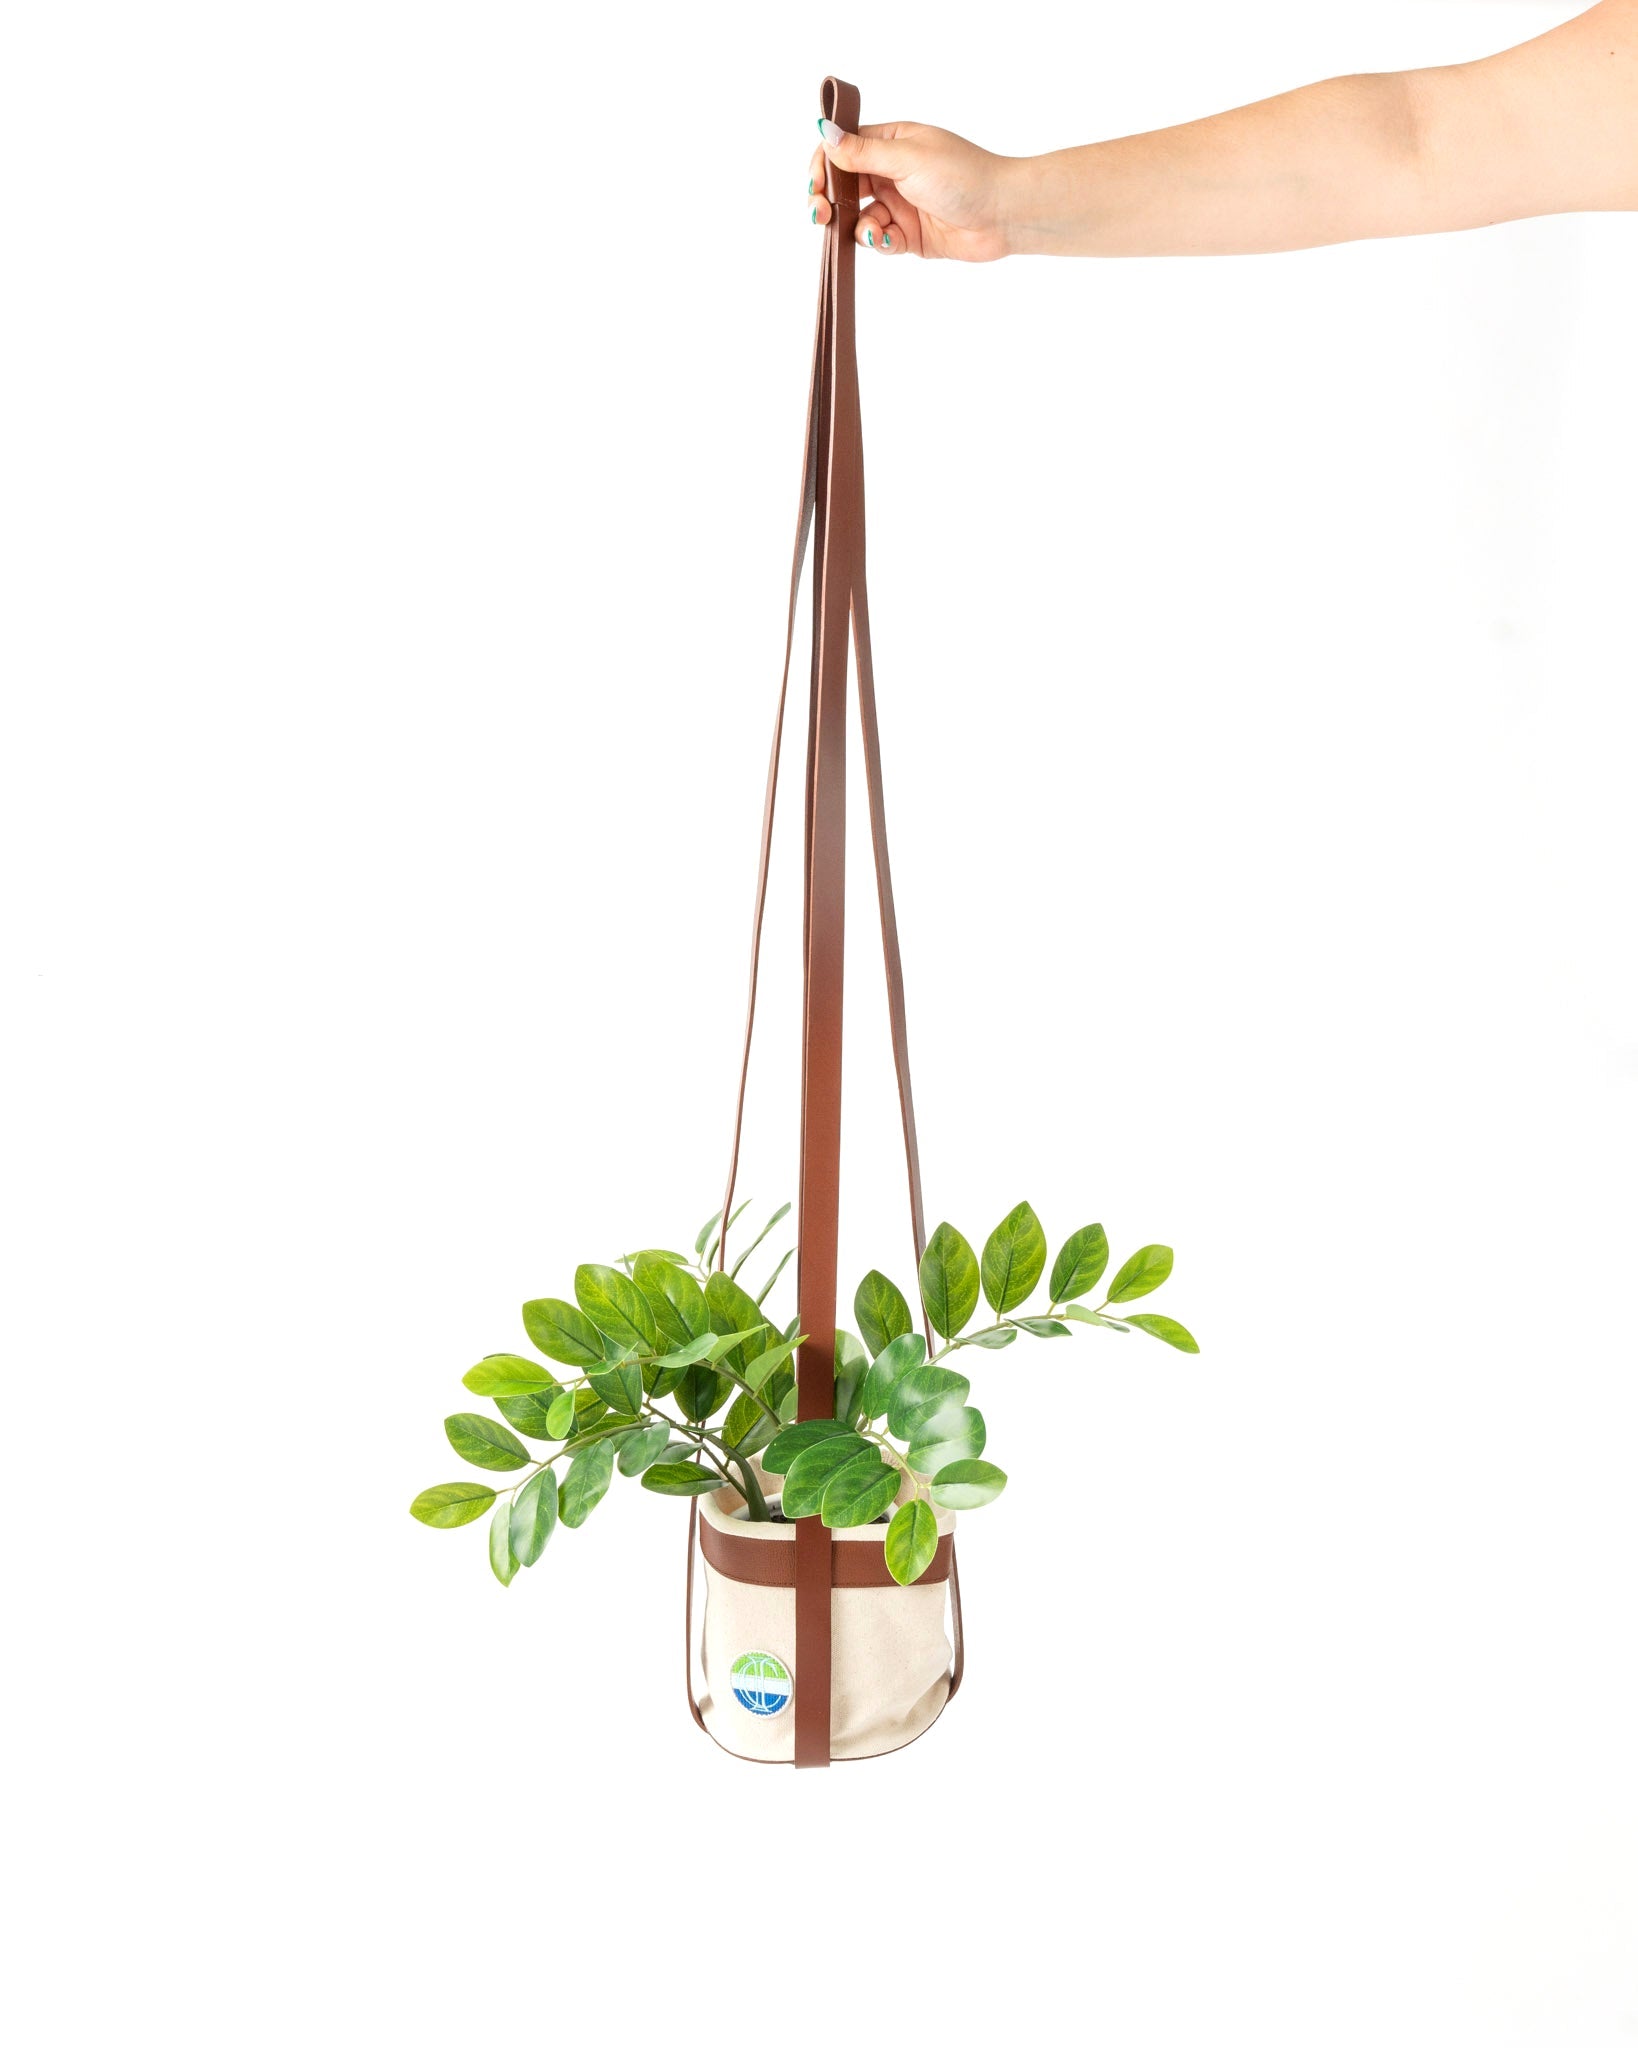 Point Dume Hanging Planter - Ivy Cove Montecito